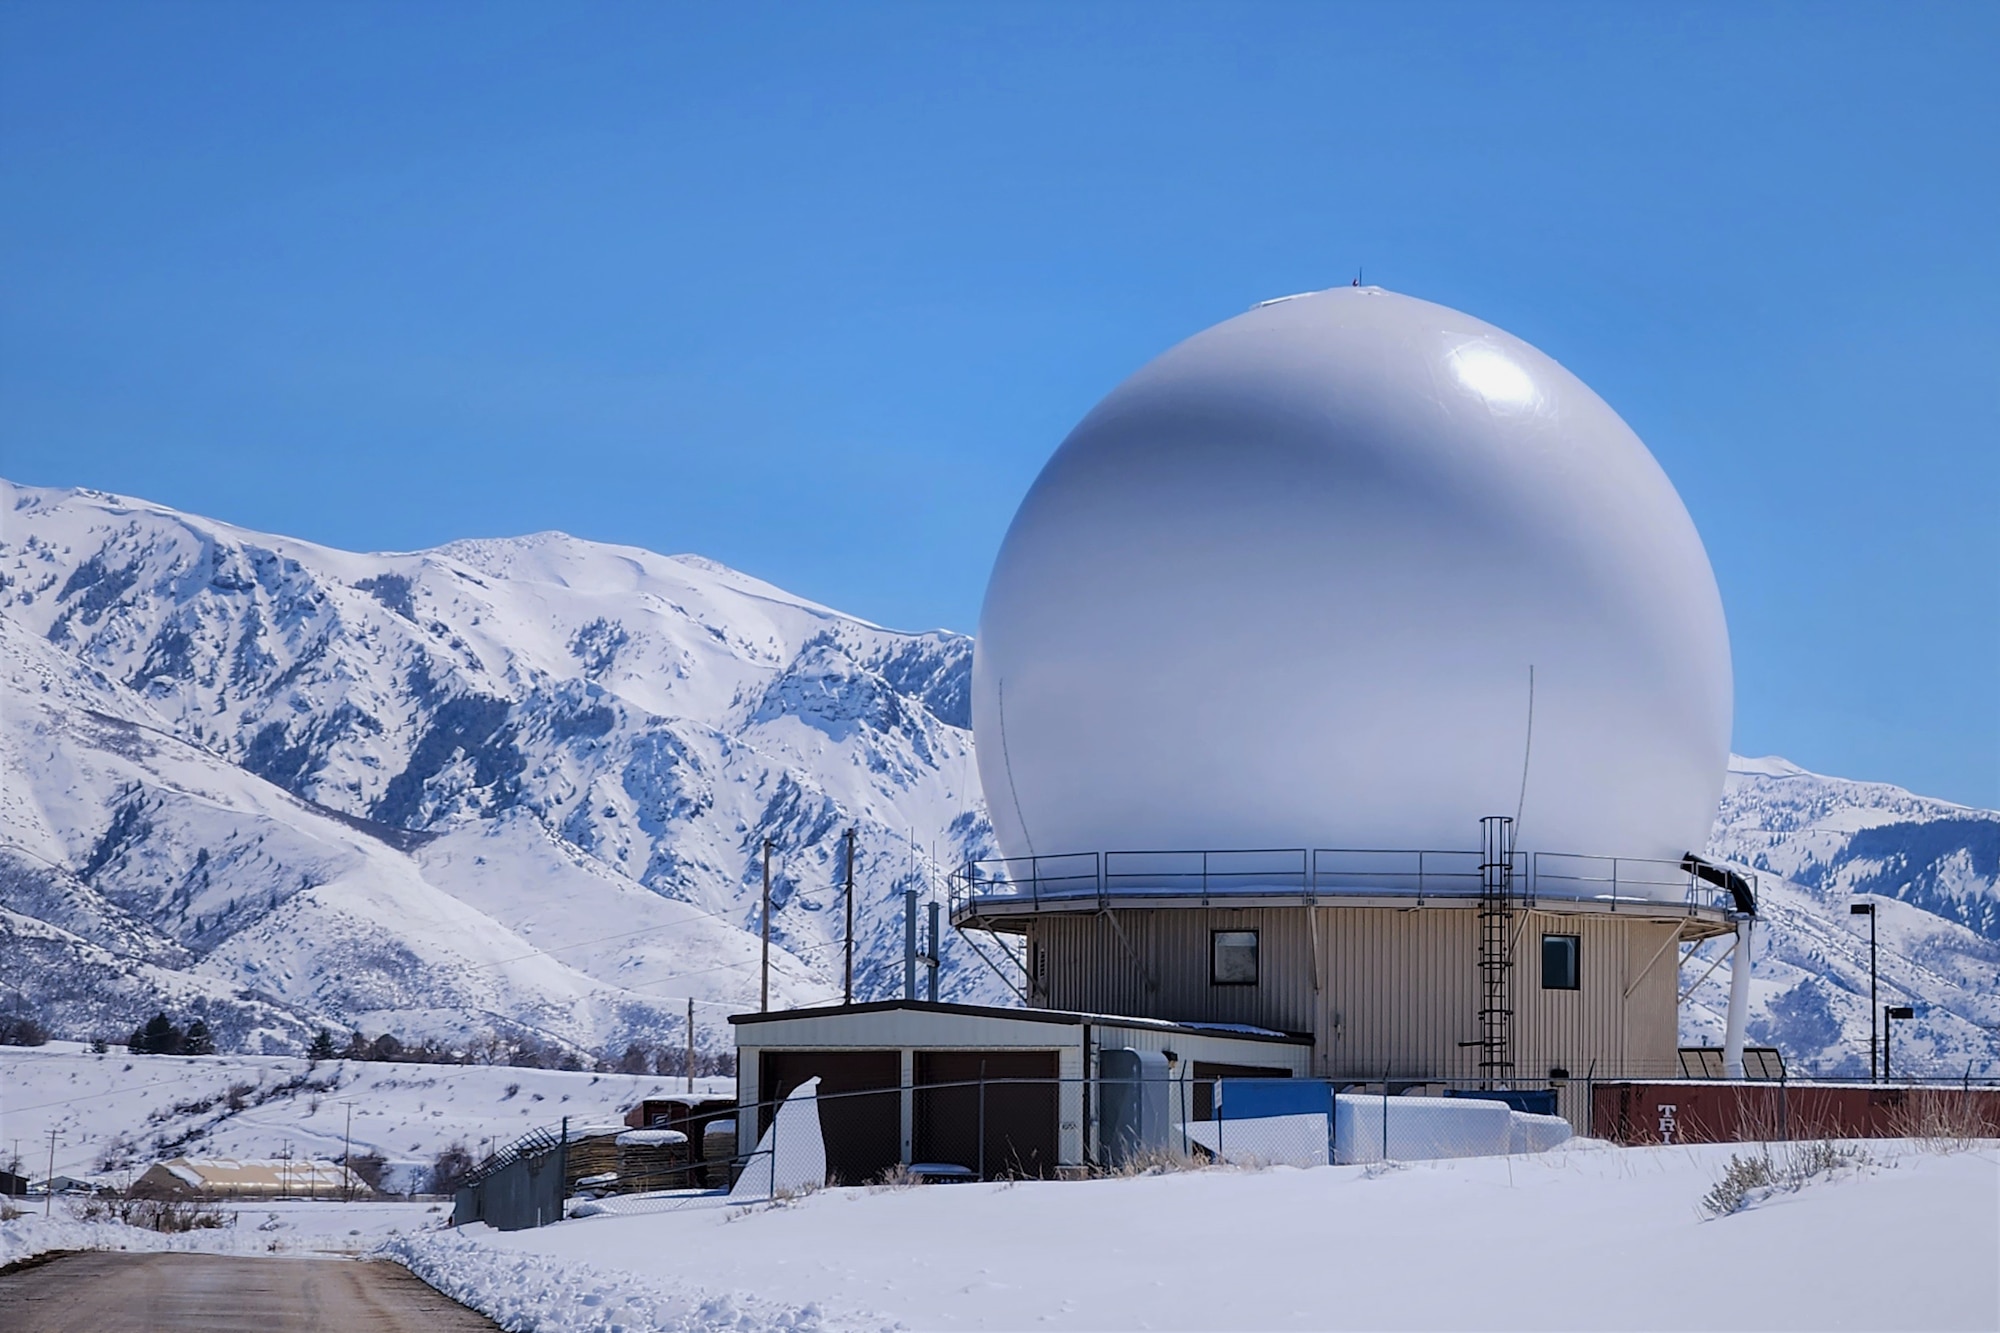 A radome structure in March 2023 at Hill Air Force Base, Utah, after a being retrofitted with new and advanced composite waterproof exterior panels. This radome structure is a test and engineering facility for the North American’s early warning radar defense system, known as the North Warning System. (Courtesy photo)